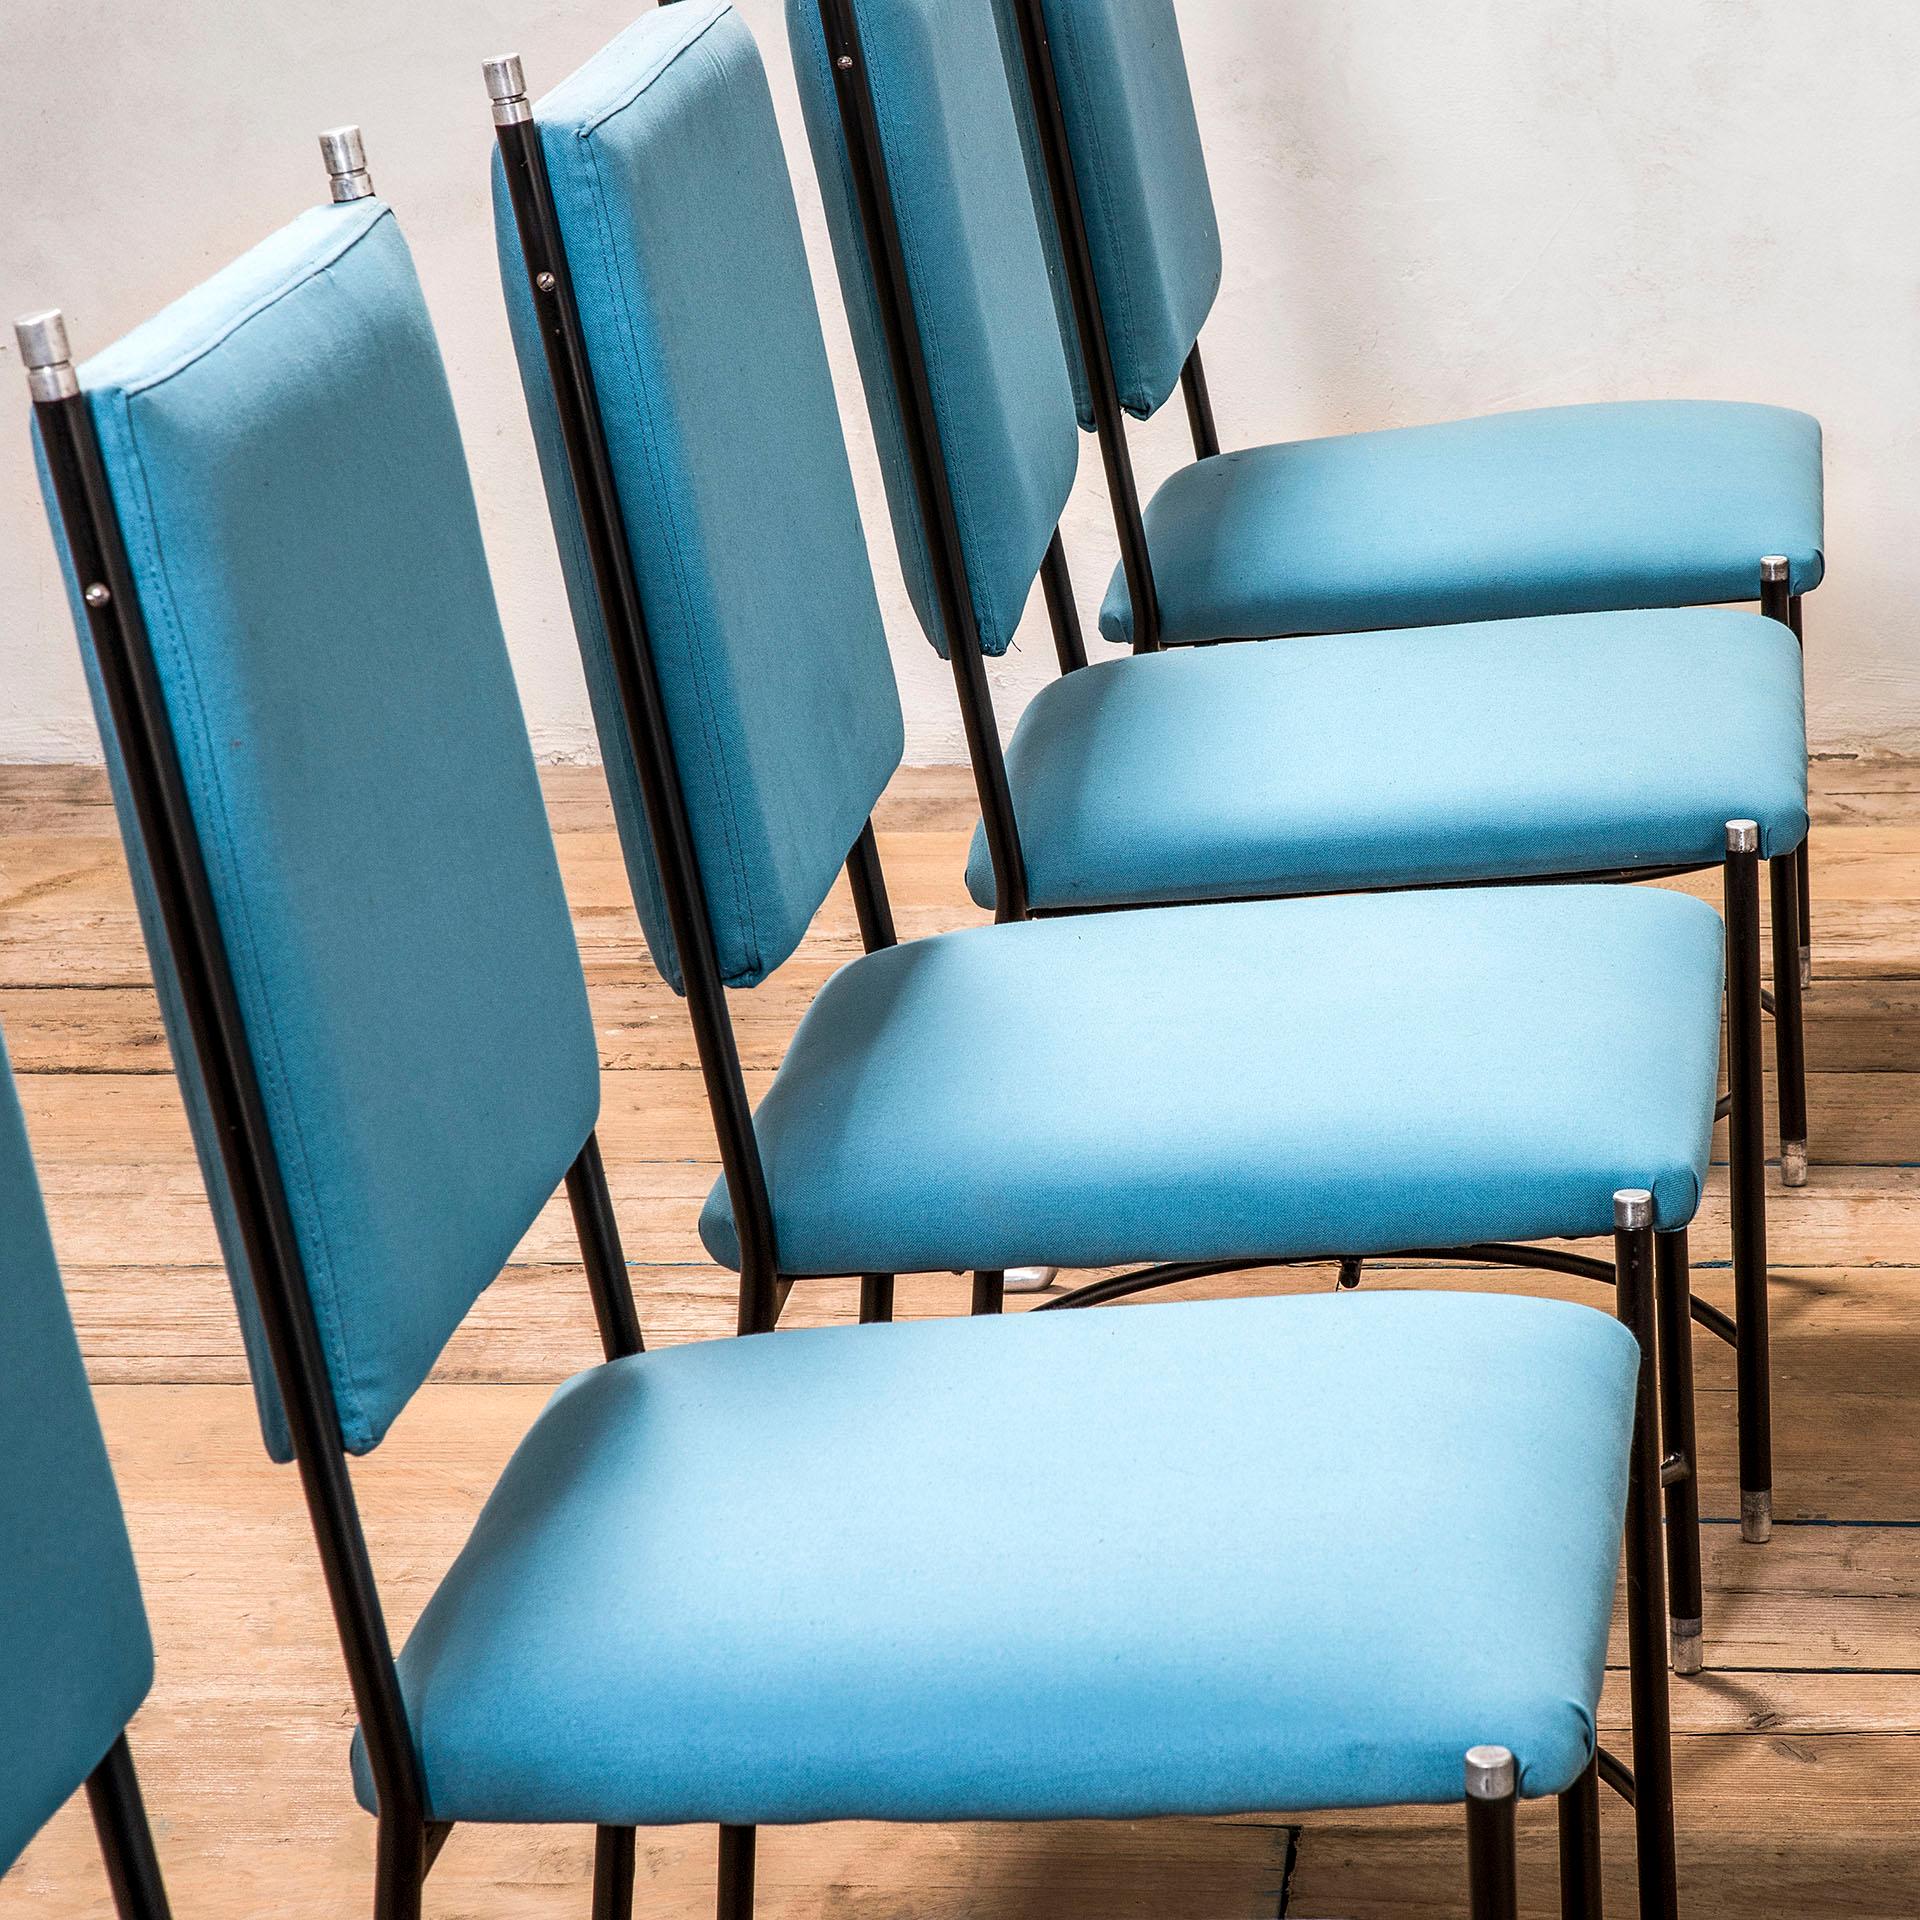 Set of eight dining chairs with wonderful structure in metal, not only with a structural aim but also very decorative. Designed by M. Blech and A: Bertrand in '50s. The seatings and the backrests are covered by a light blue fabric. The feet of each